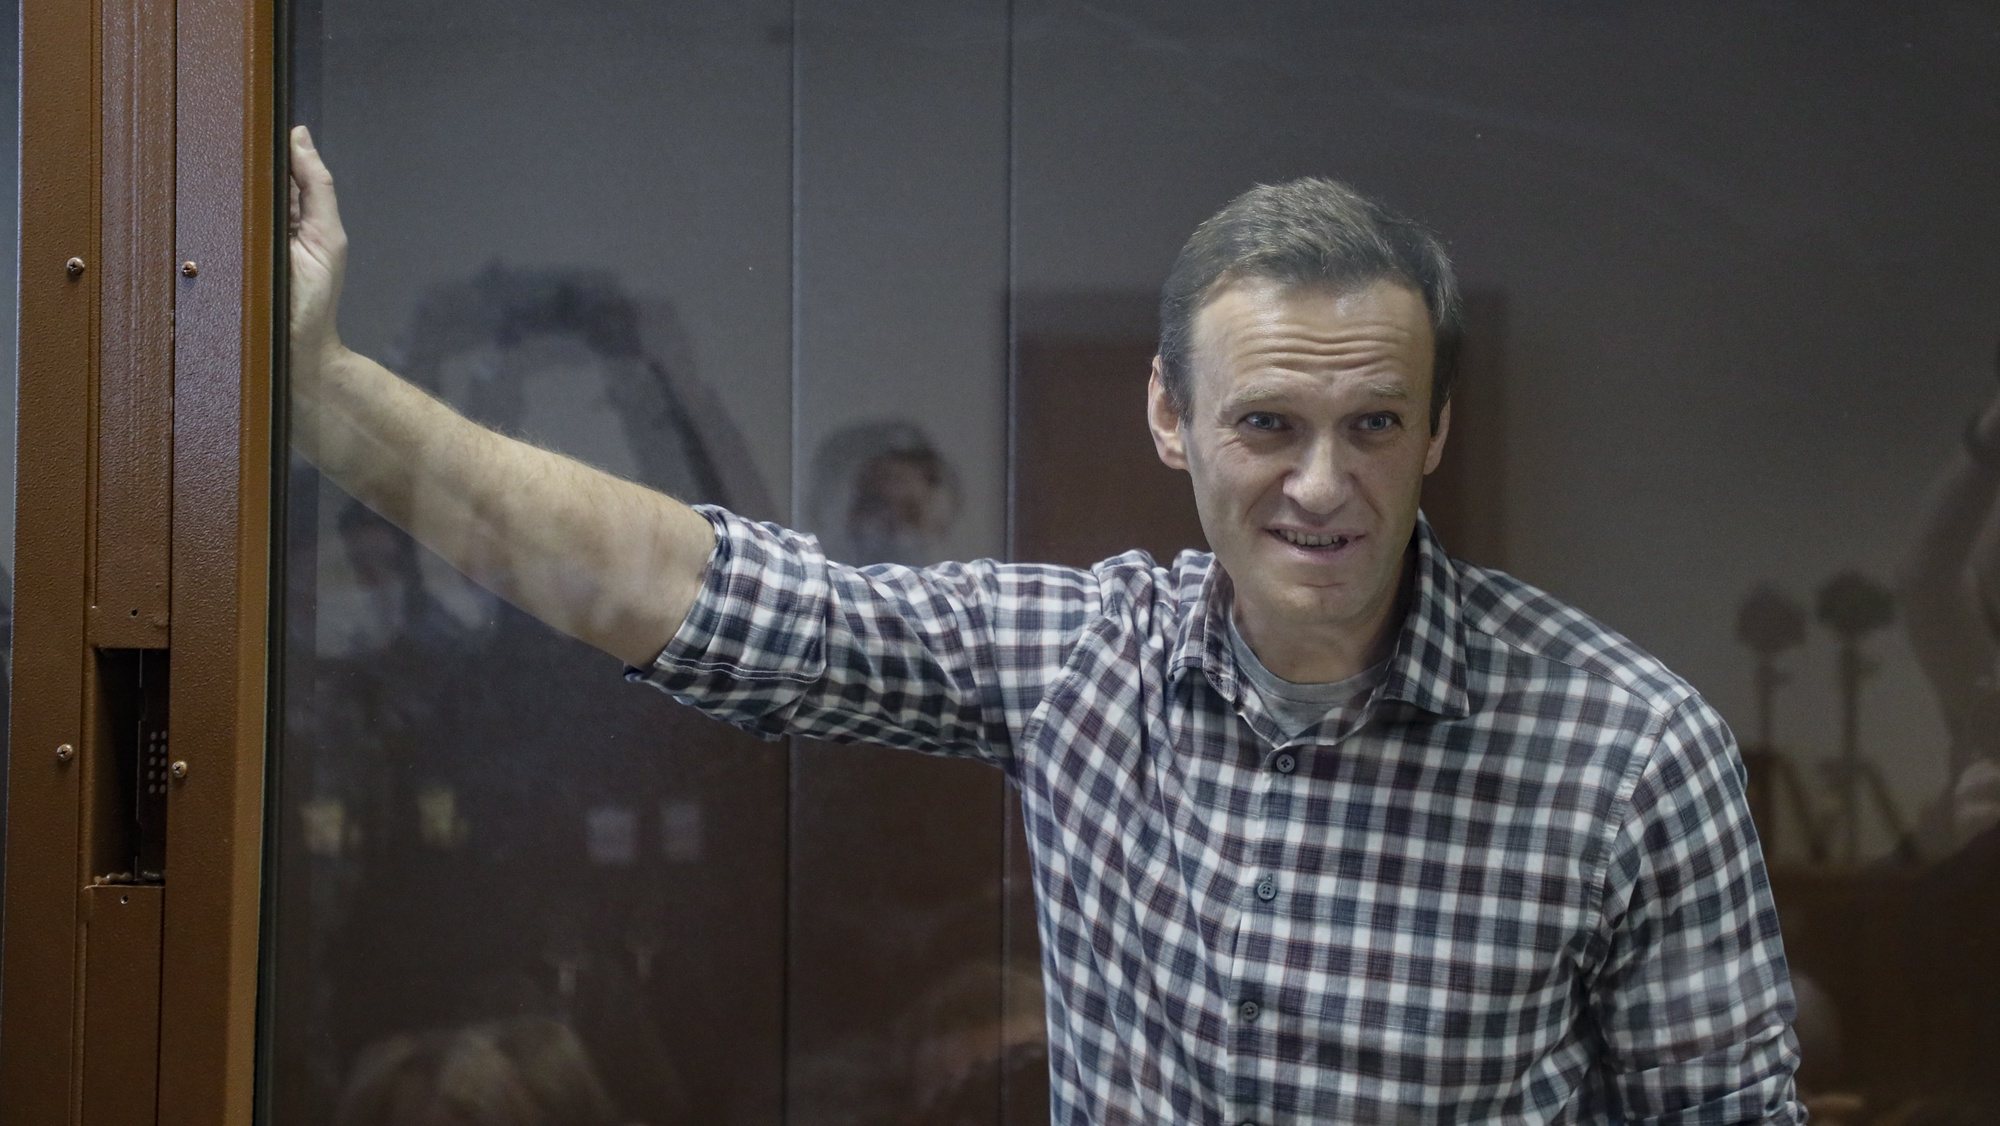 epa09025238 Russian opposition leader Alexei Navalny stands inside a glass cage prior to a hearing at the Babushkinsky District Court in Moscow, Russia, 20 February 2021. The Moscow City court will hold a visiting session at the Babushkinsky District Court Building to consider Navalny&#039;s lawyers appeal against a court verdict issued on 02 February 2021, to replace the suspended sentence issued to Navalny in the Yves Rocher embezzlement case with an actual term in a penal colony.  EPA/YURI KOCHETKOV MANDATORY CREDIT